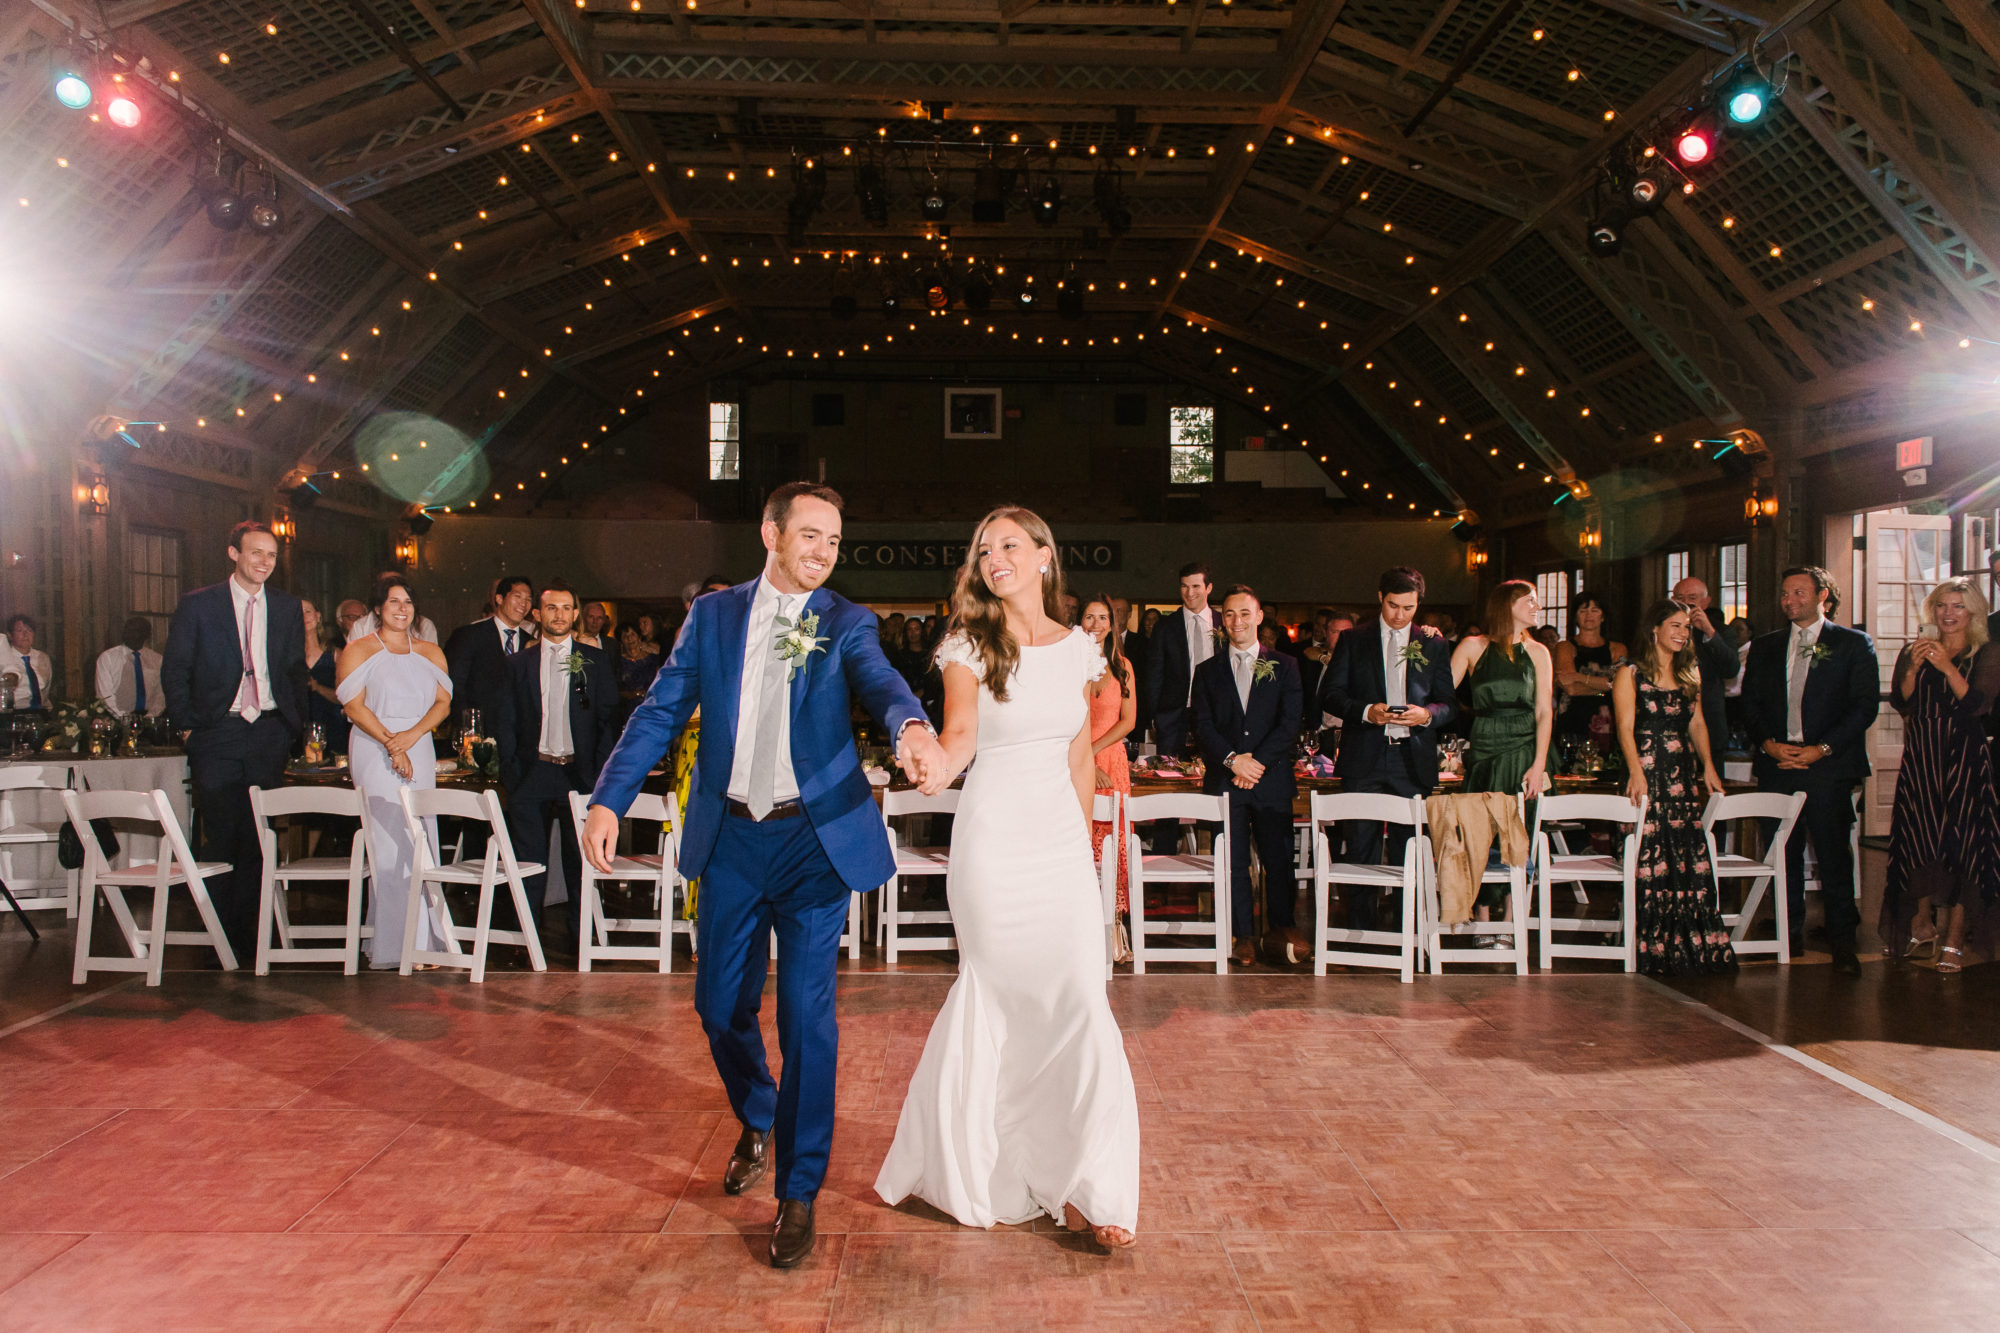 Wedding Photography Tips: How to Take Gorgeous Indoor Wedding Photos by popular New England photographer, Shannon Shipman: image of a bride and groom walking out onto the dance floor. 